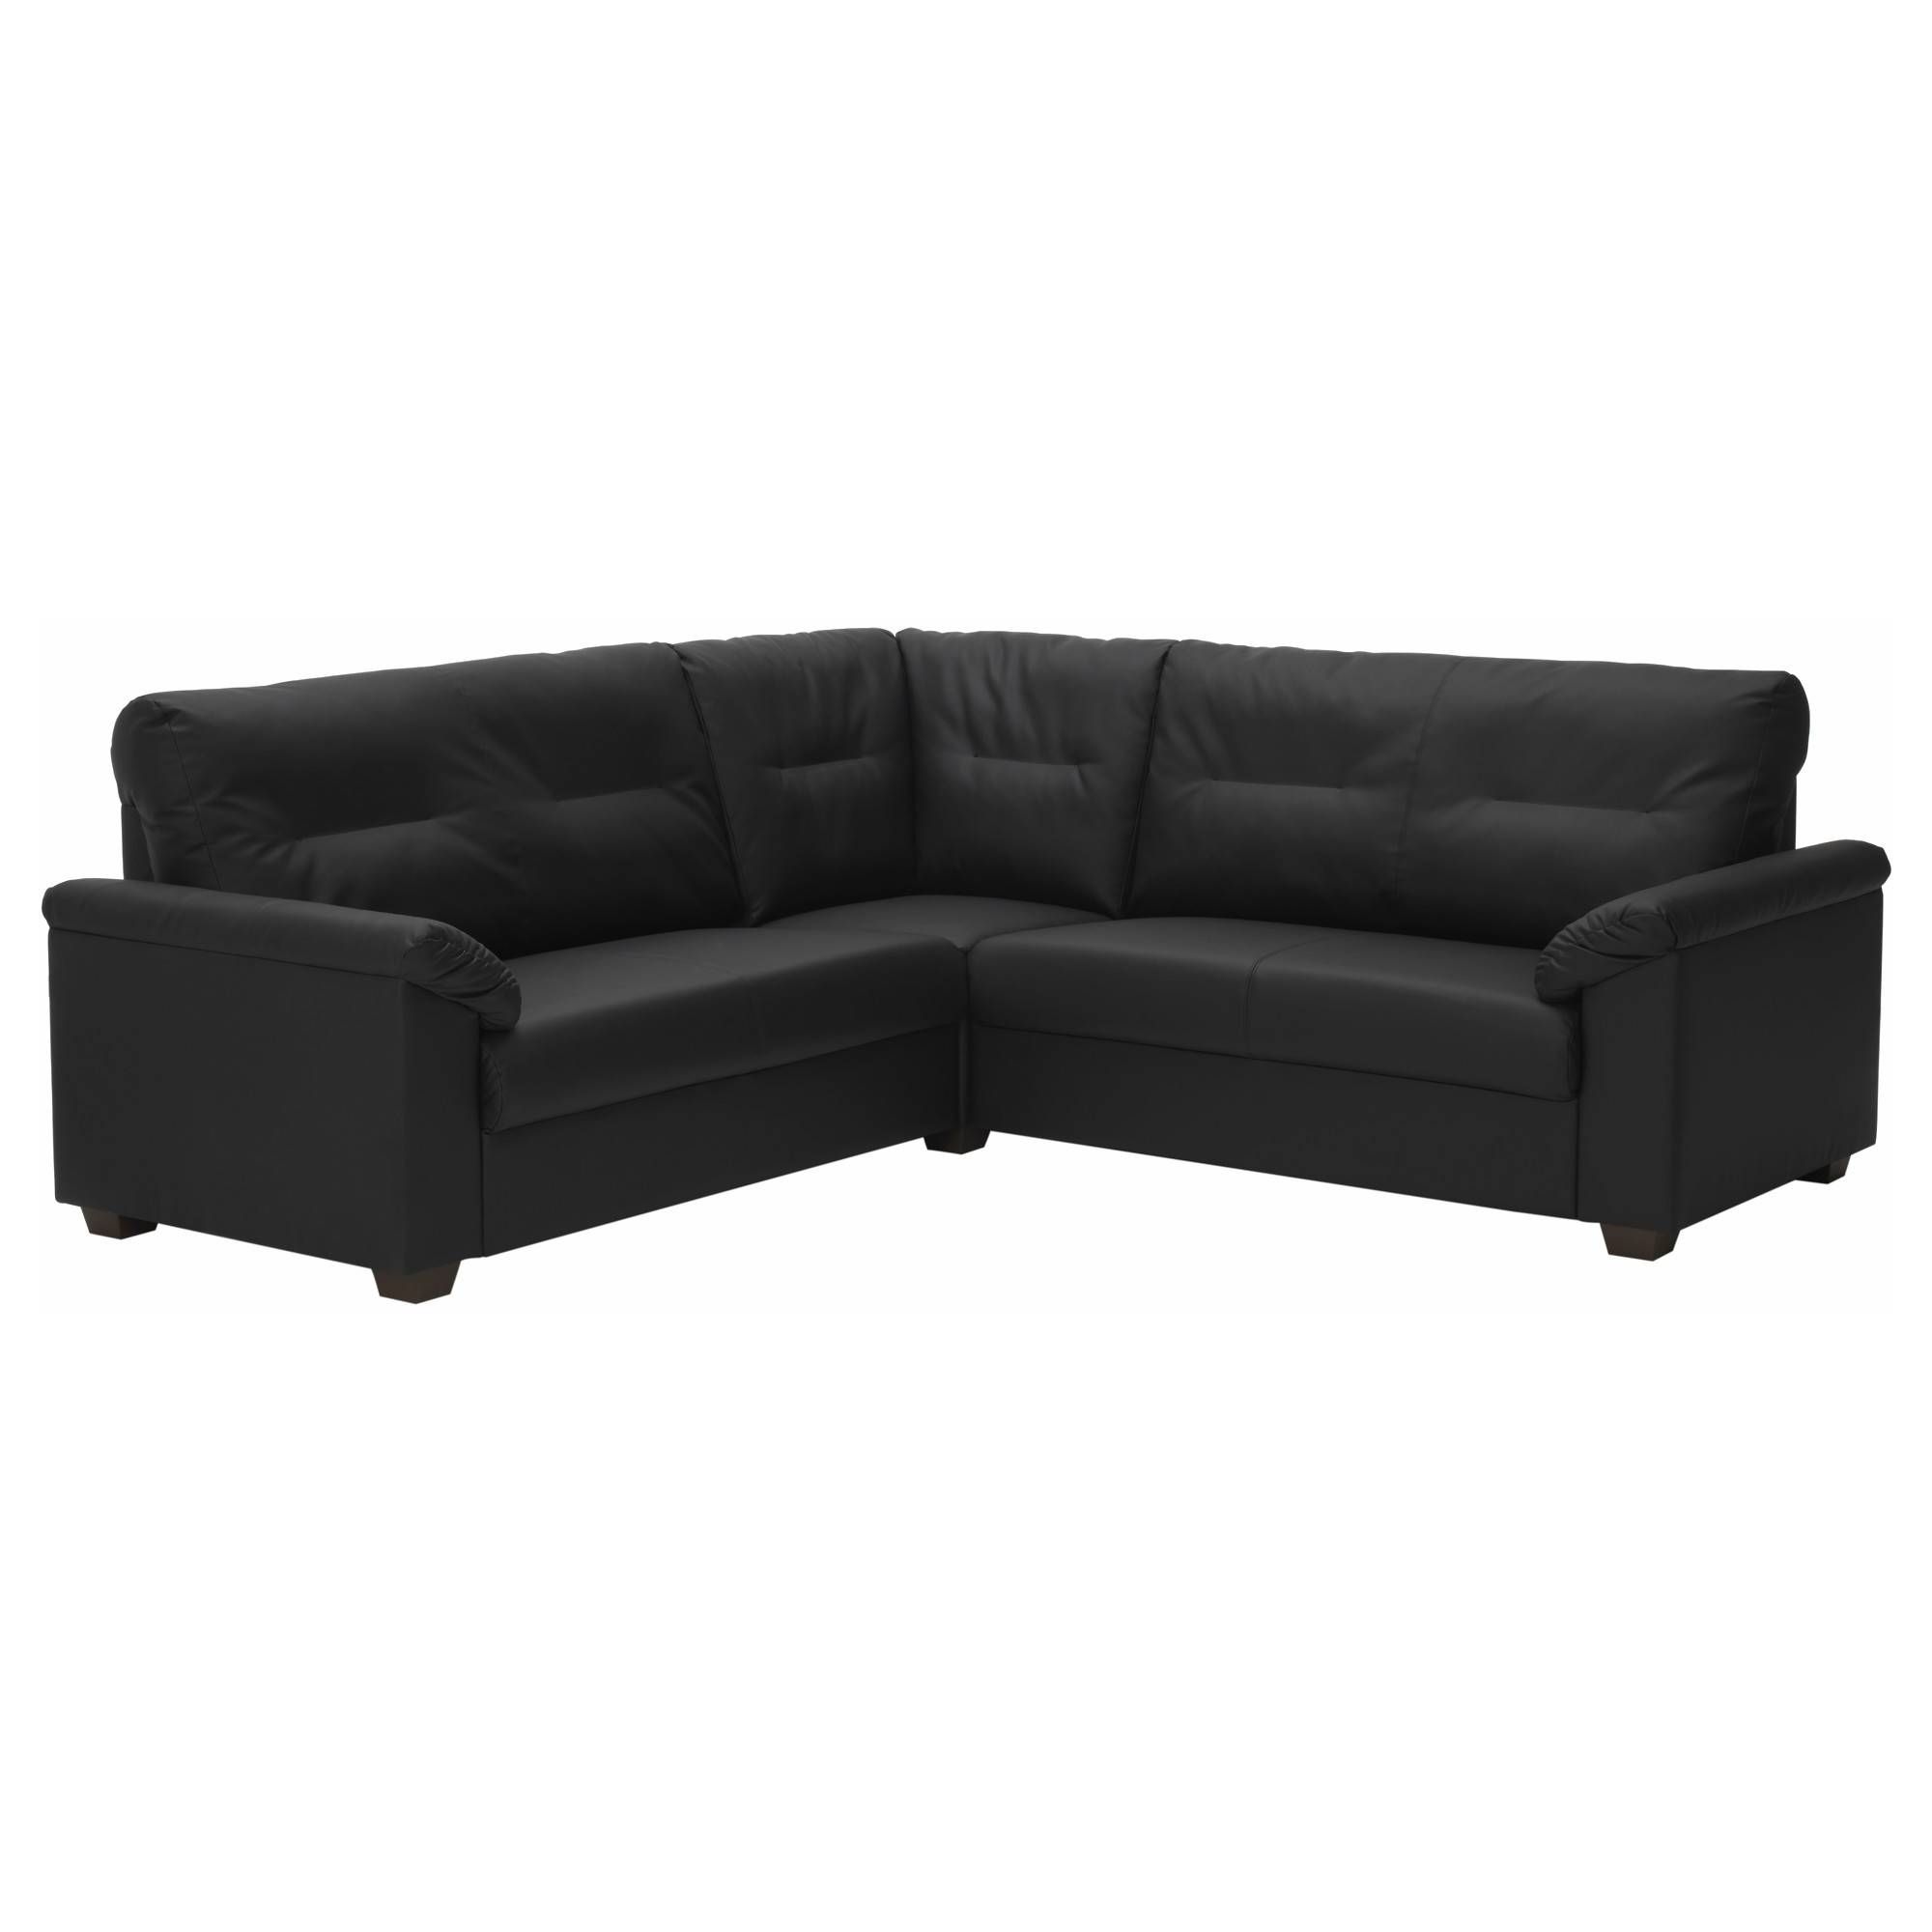 Leather & Faux Leather Couches, Chairs & Ottomans – Ikea In 4 Seater Couch (View 4 of 30)